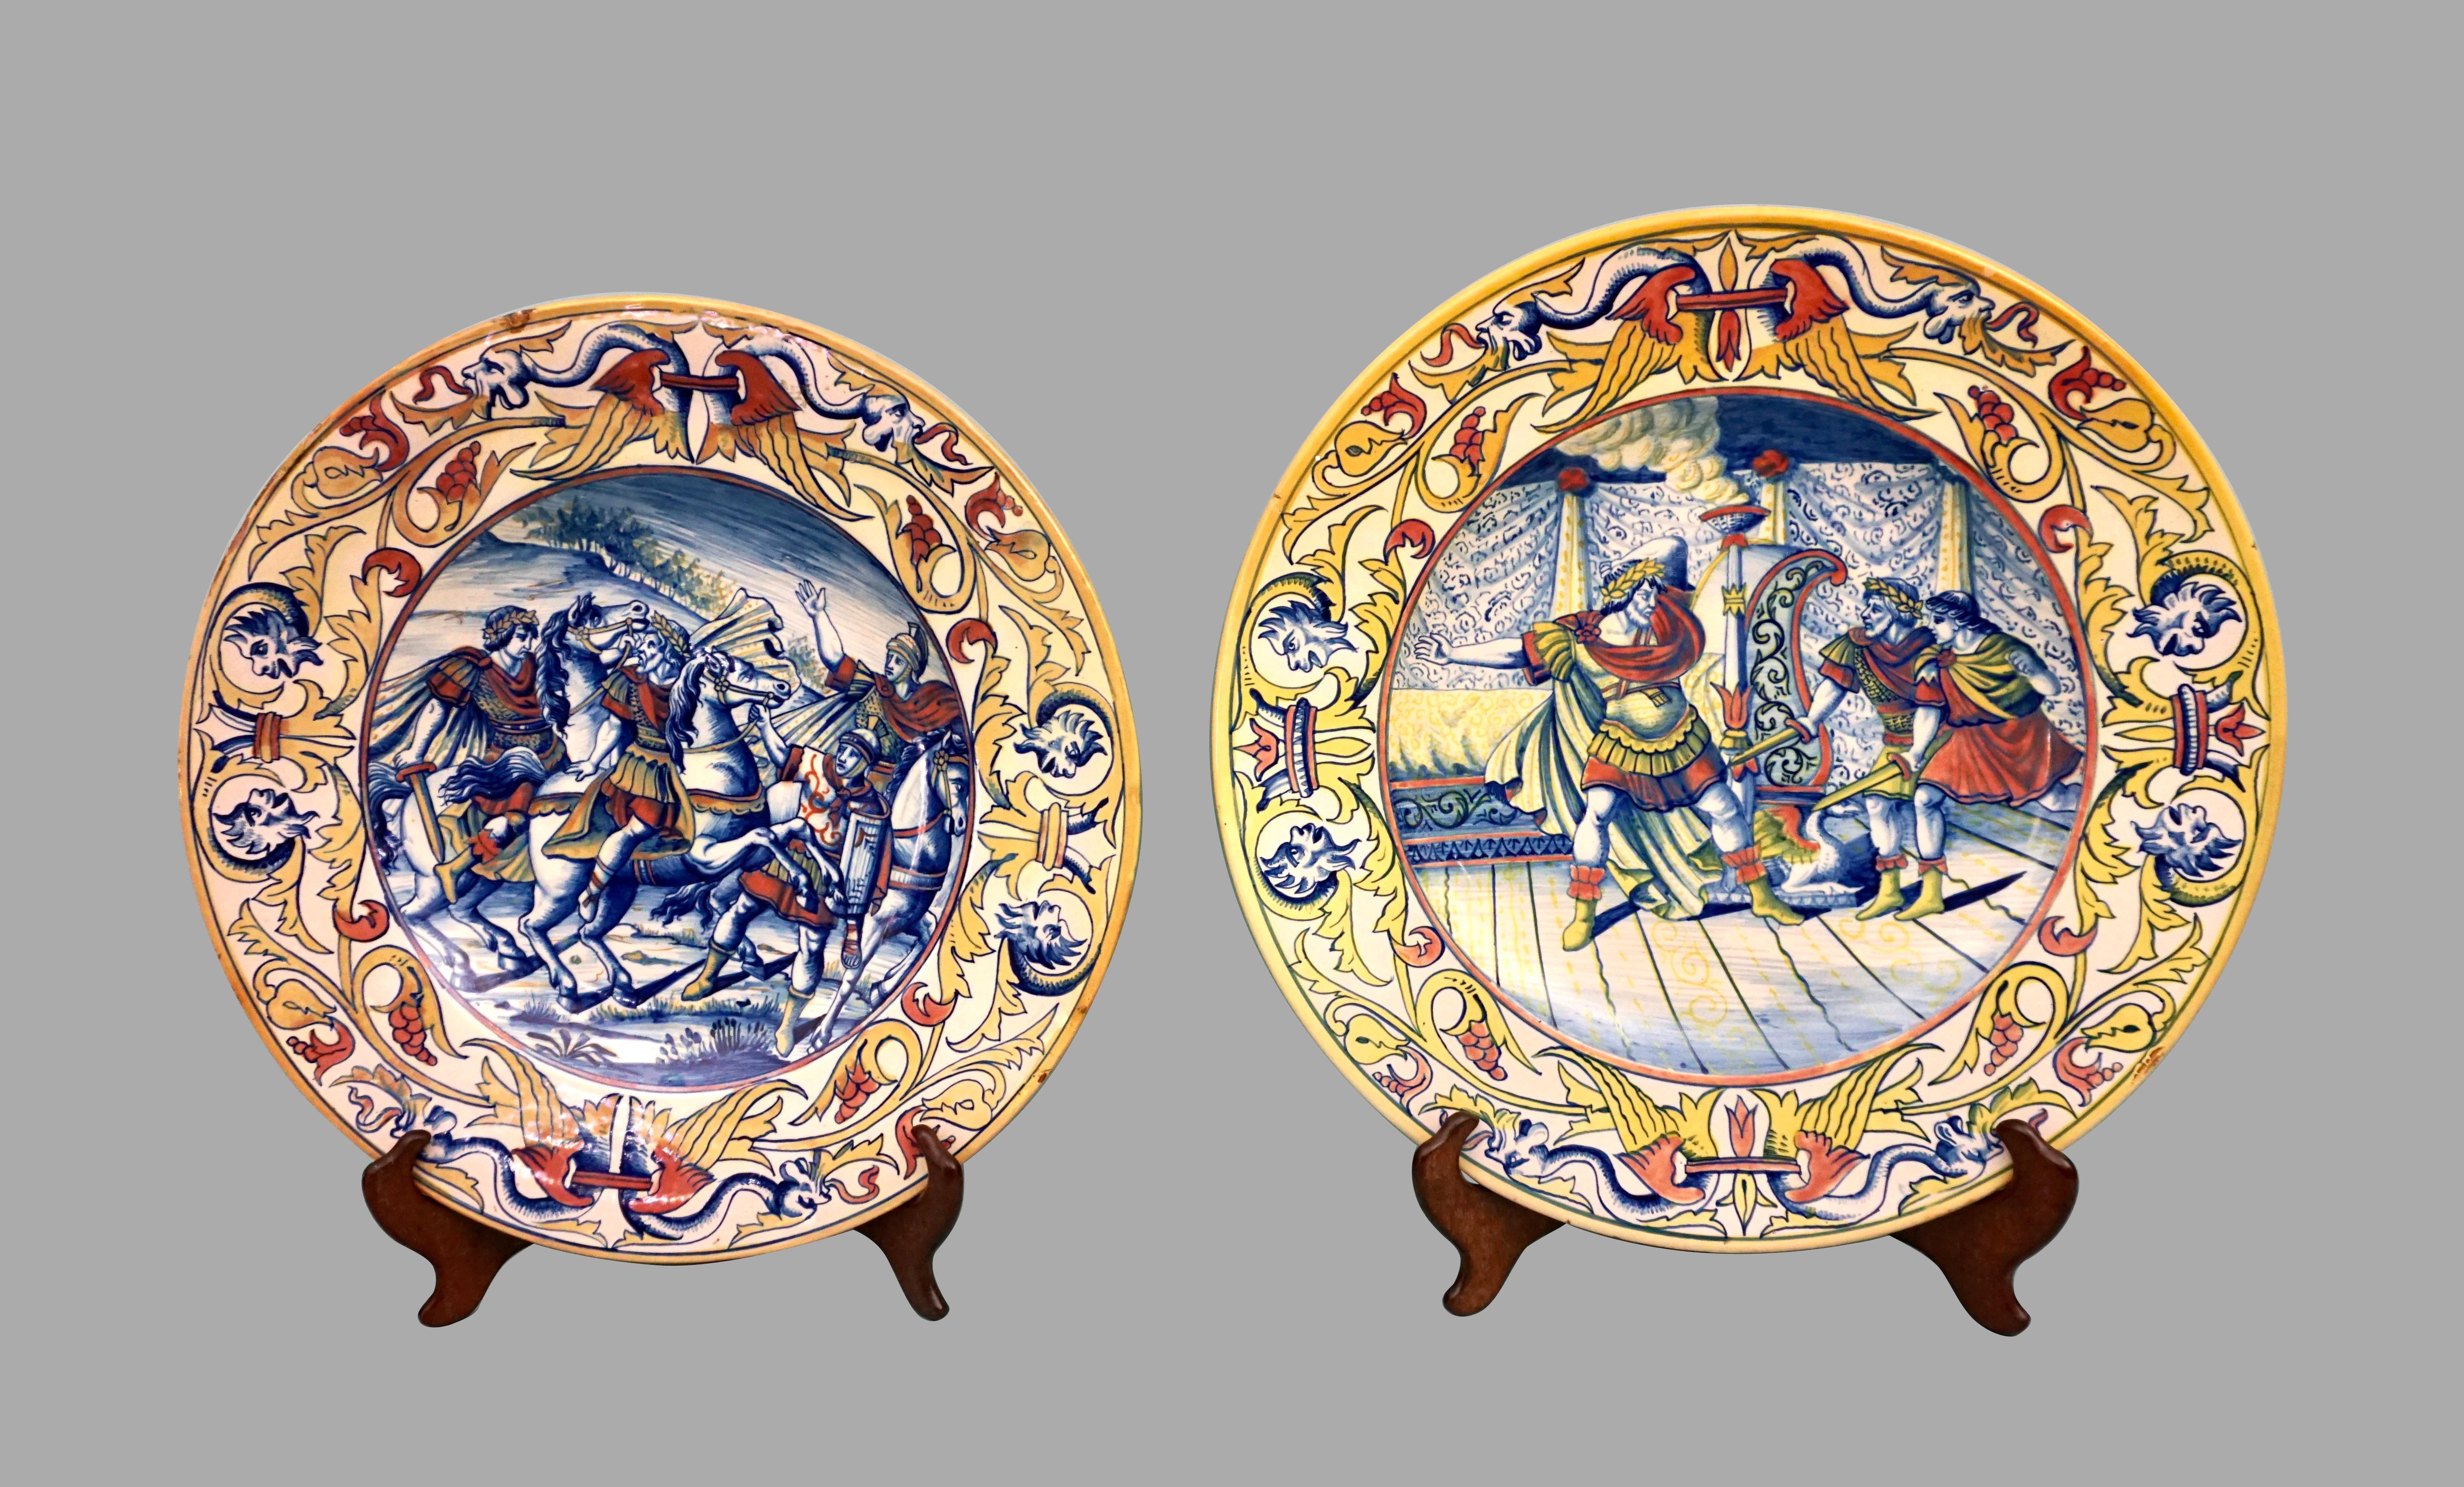 A near pair of Italian maiolica plates depicting battle scenes of Roman soldiers one with garrisons on horseback the other possibly an allegorical tale of the assassination of a Roman noble or emperor. Both are well-executed with a fluency of line,